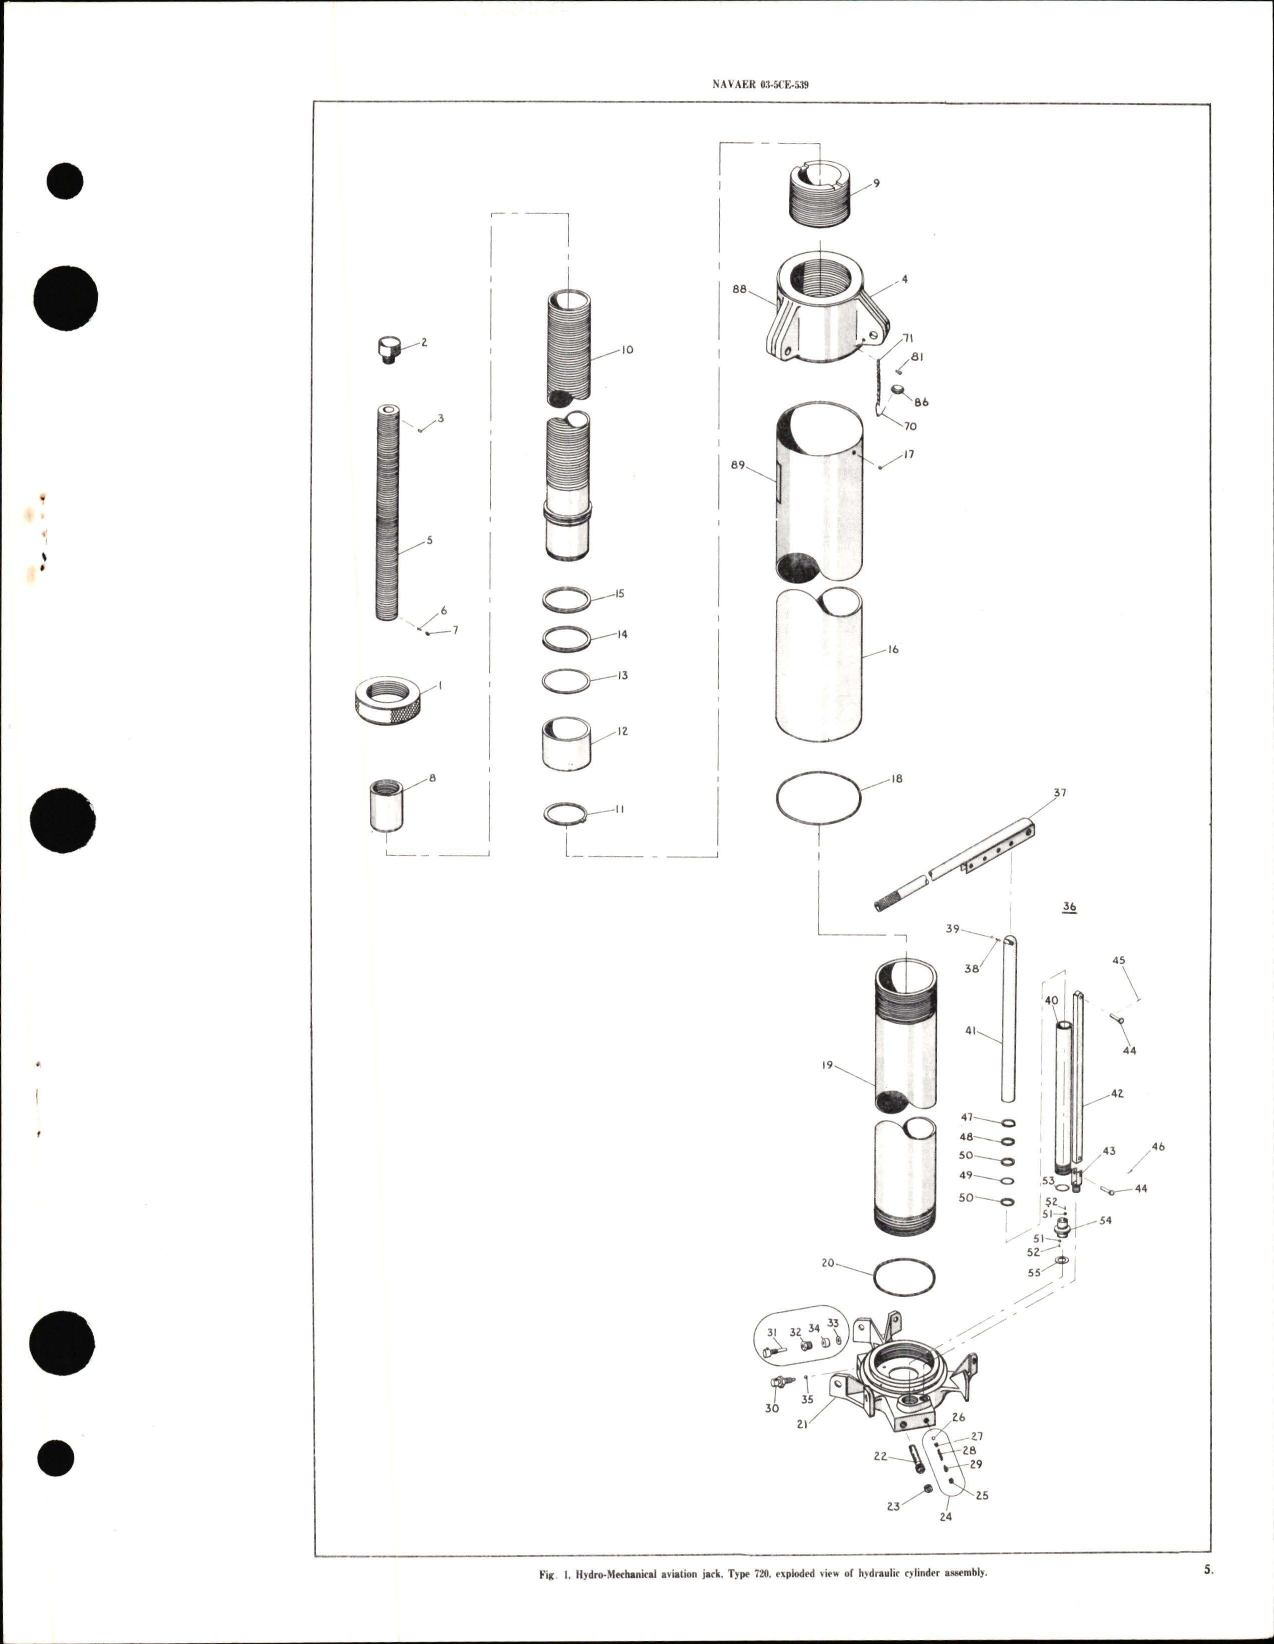 Sample page 5 from AirCorps Library document: Operations, Service and Overhaul Instructions with Parts Breakdown for Hydro Mechanical Aviation Jack, Single Stage Type 720